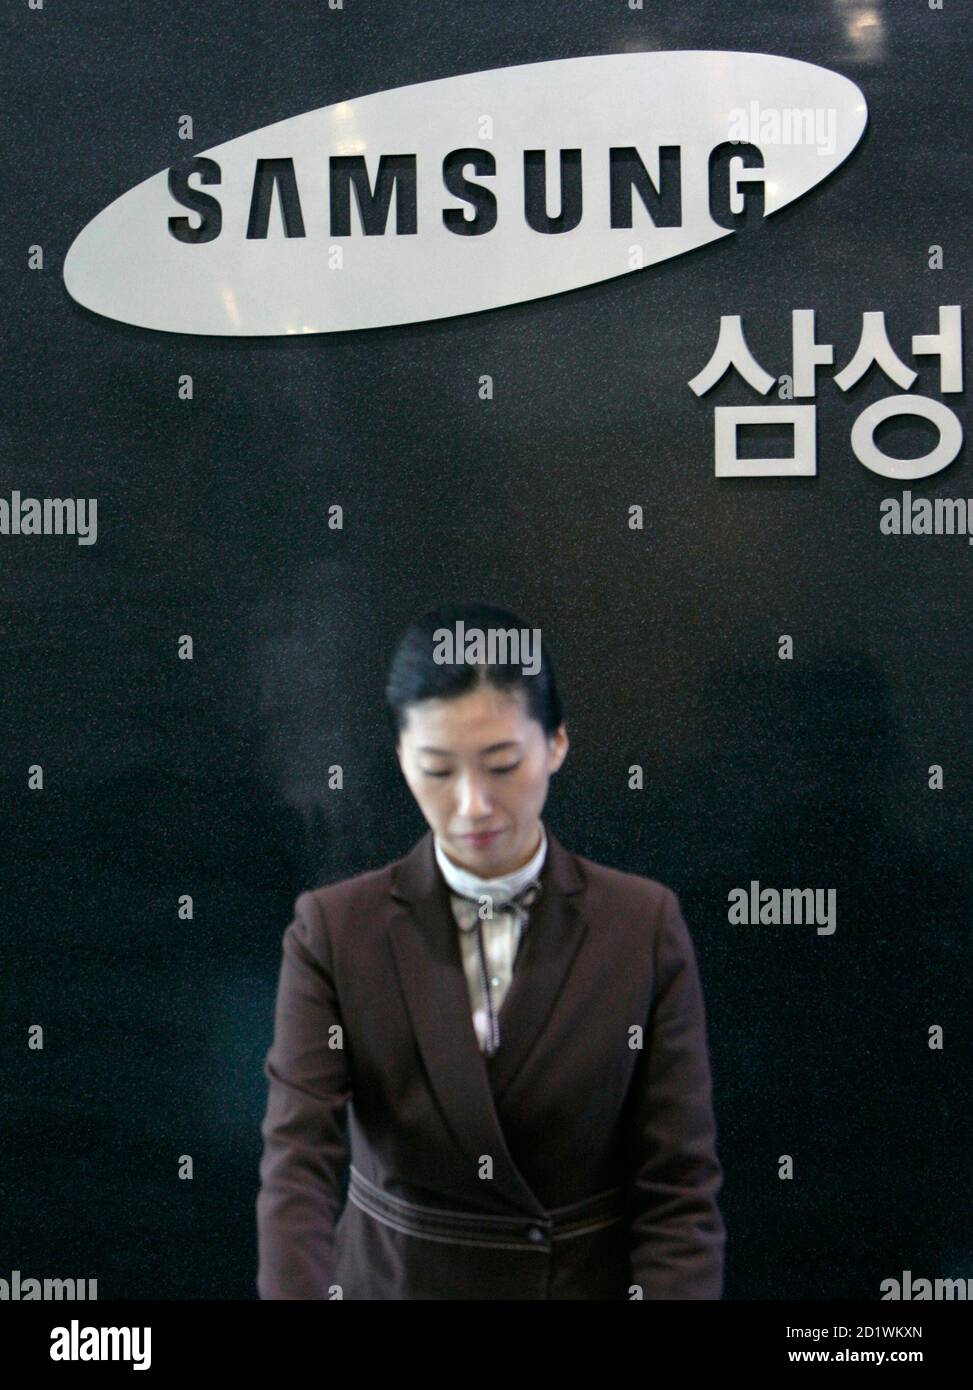 An employee of Samsung Securities stands in front of its logo at the unit's headquarters in Seoul November 30, 2007. South Korean prosecutors probing corruption at the Samsung Group raided its brokerage unit Samsung Securities on Friday and did not rule out further search and seizures at Samsung offices, an official said.  REUTERS/Jo Yong-Hak (SOUTH KOREA) Stock Photo